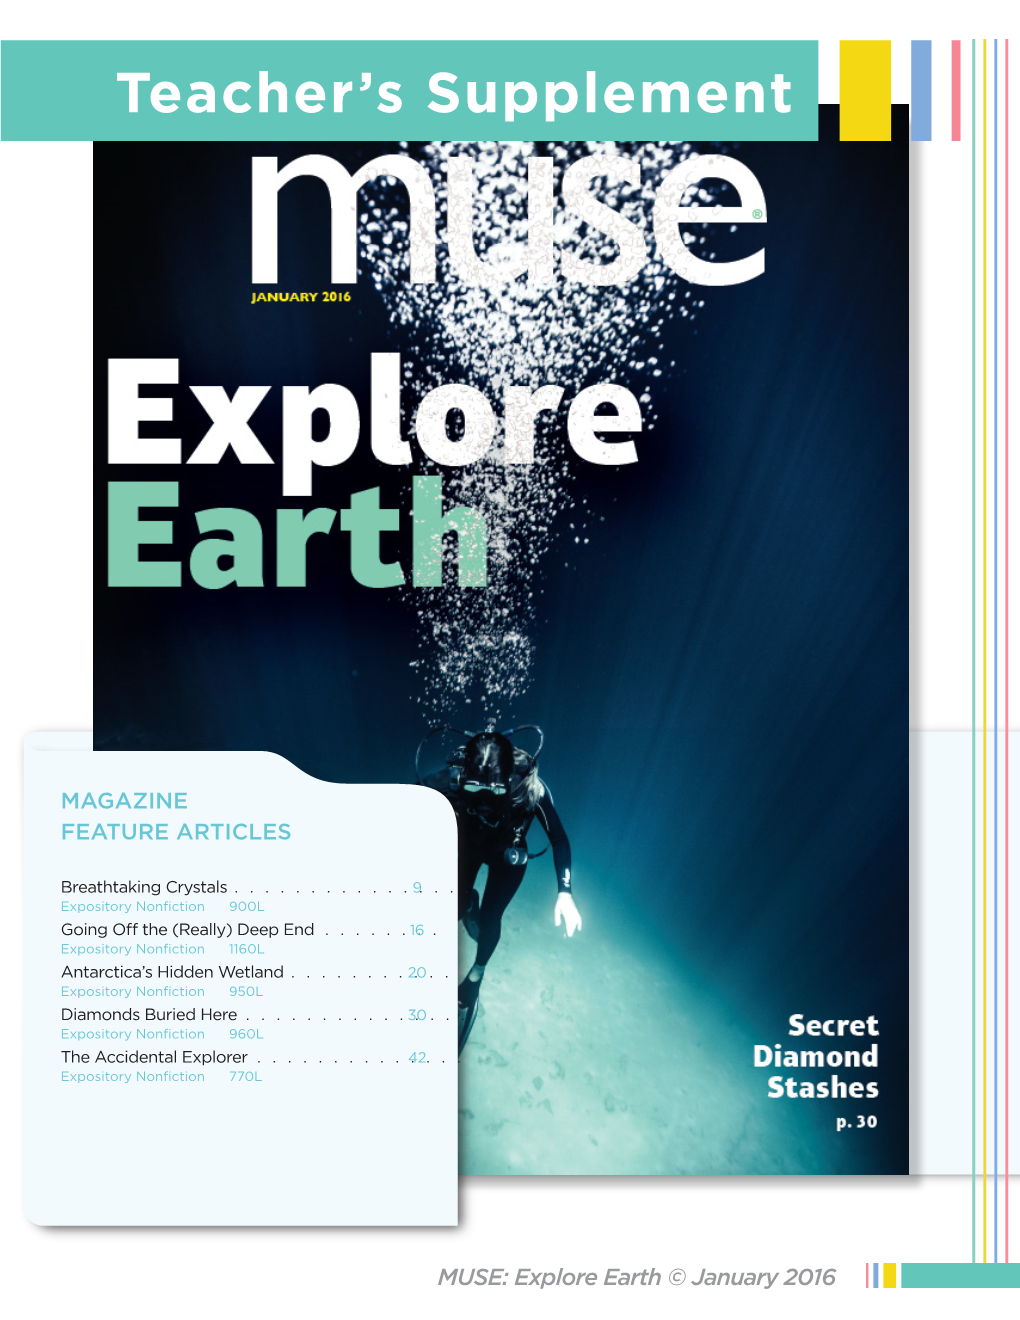 Explore Earth © January 2016 Contents